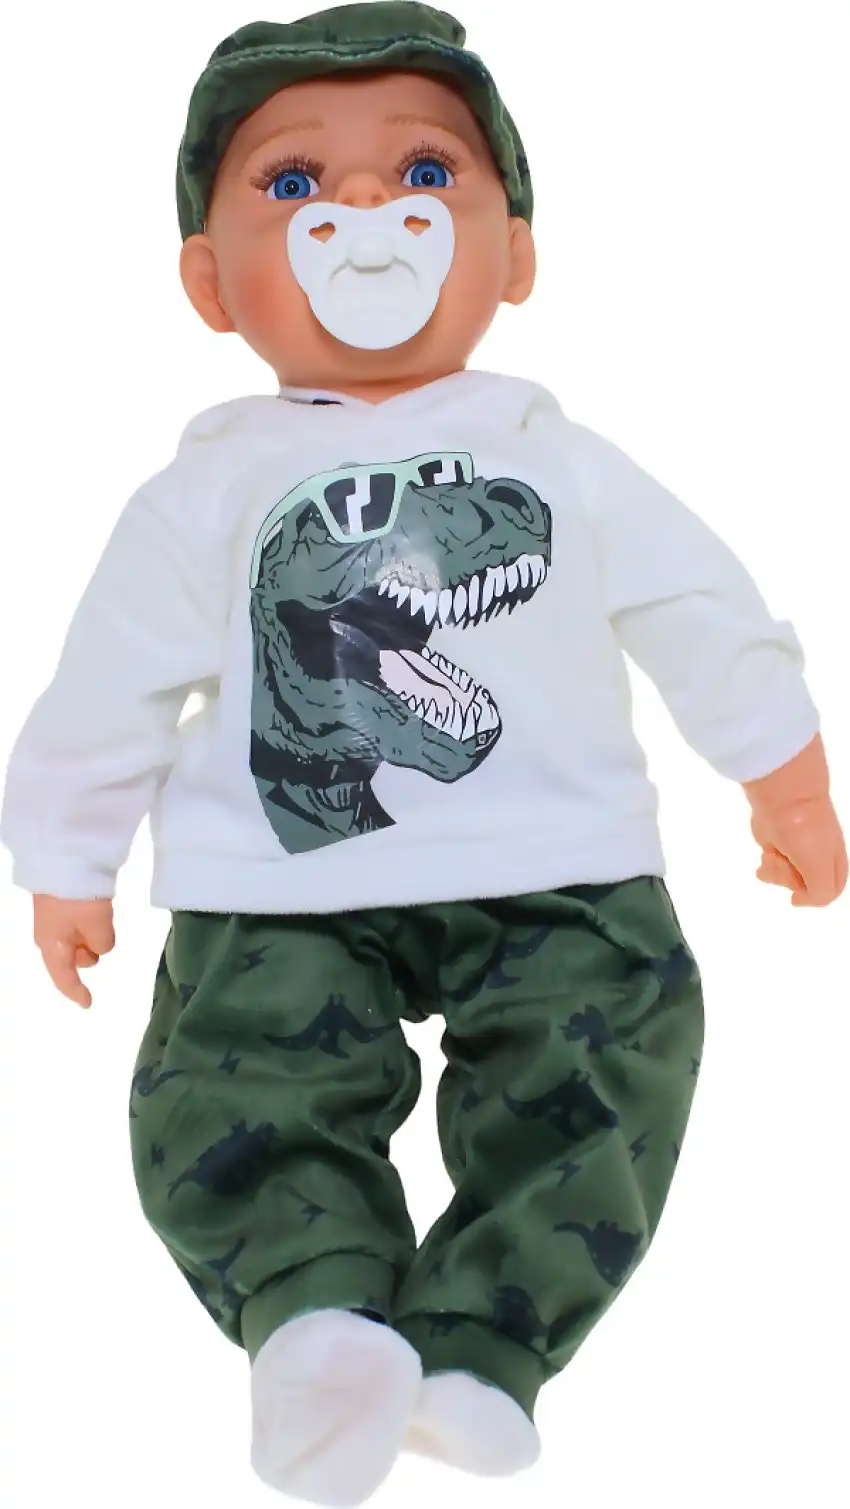 Cotton Candy - Baby Doll Jack With Dummy - White Hoodie With Dinosaur